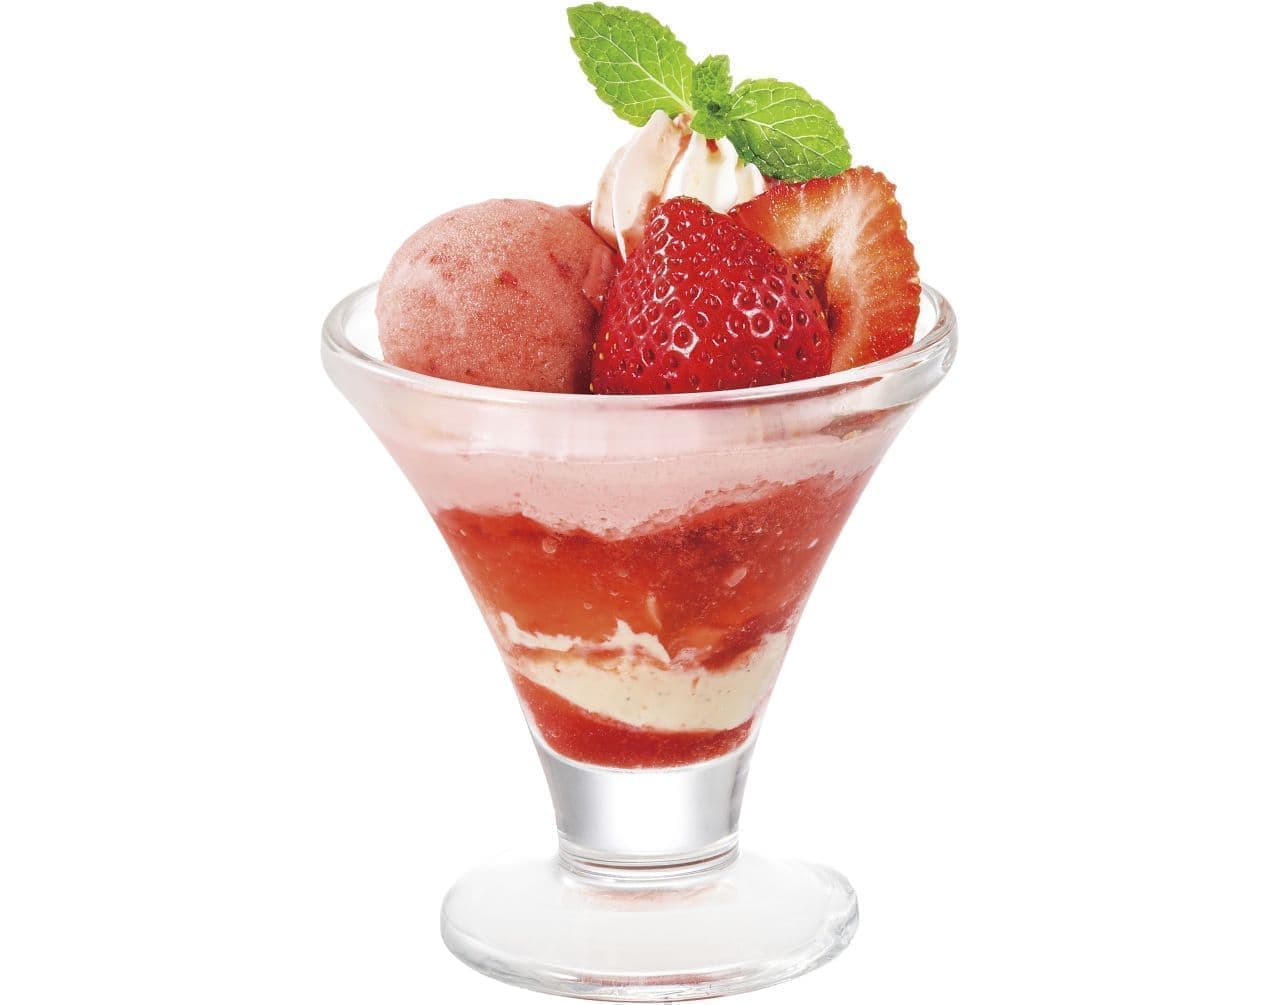 Denny's has Amaou desserts - sundaes and mini parfait galette rolls to enhance the taste of strawberries.